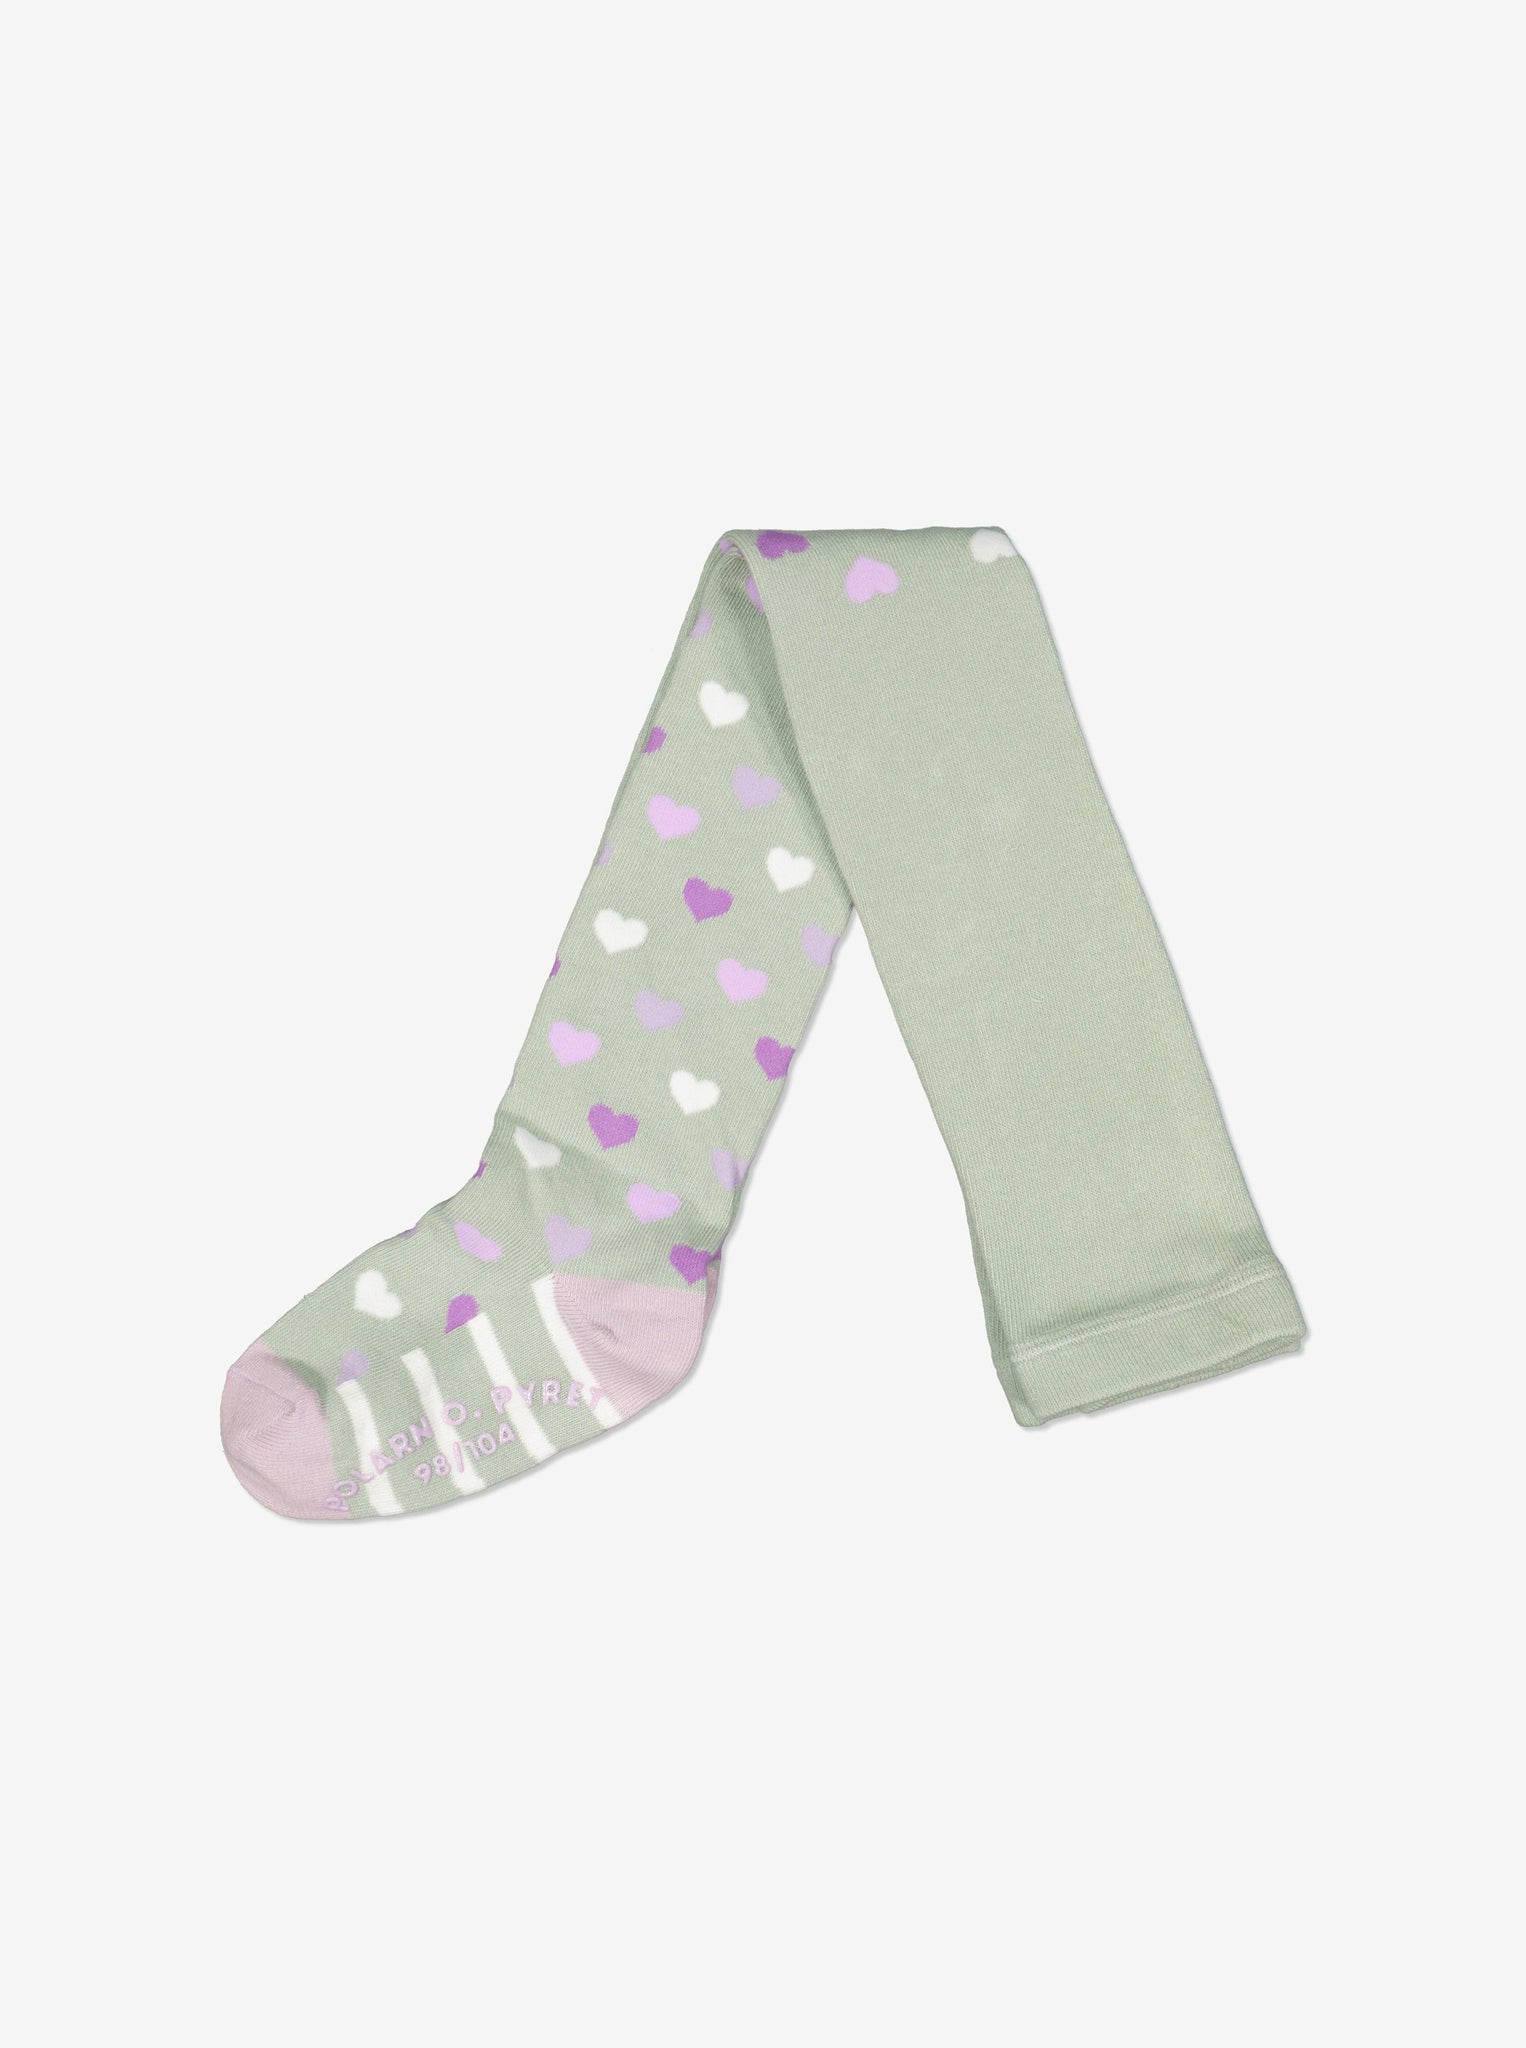  Organic Green Heart Print Kids Tights from Polarn O. Pyret Kidswear. Made from sustainably sourced materials.